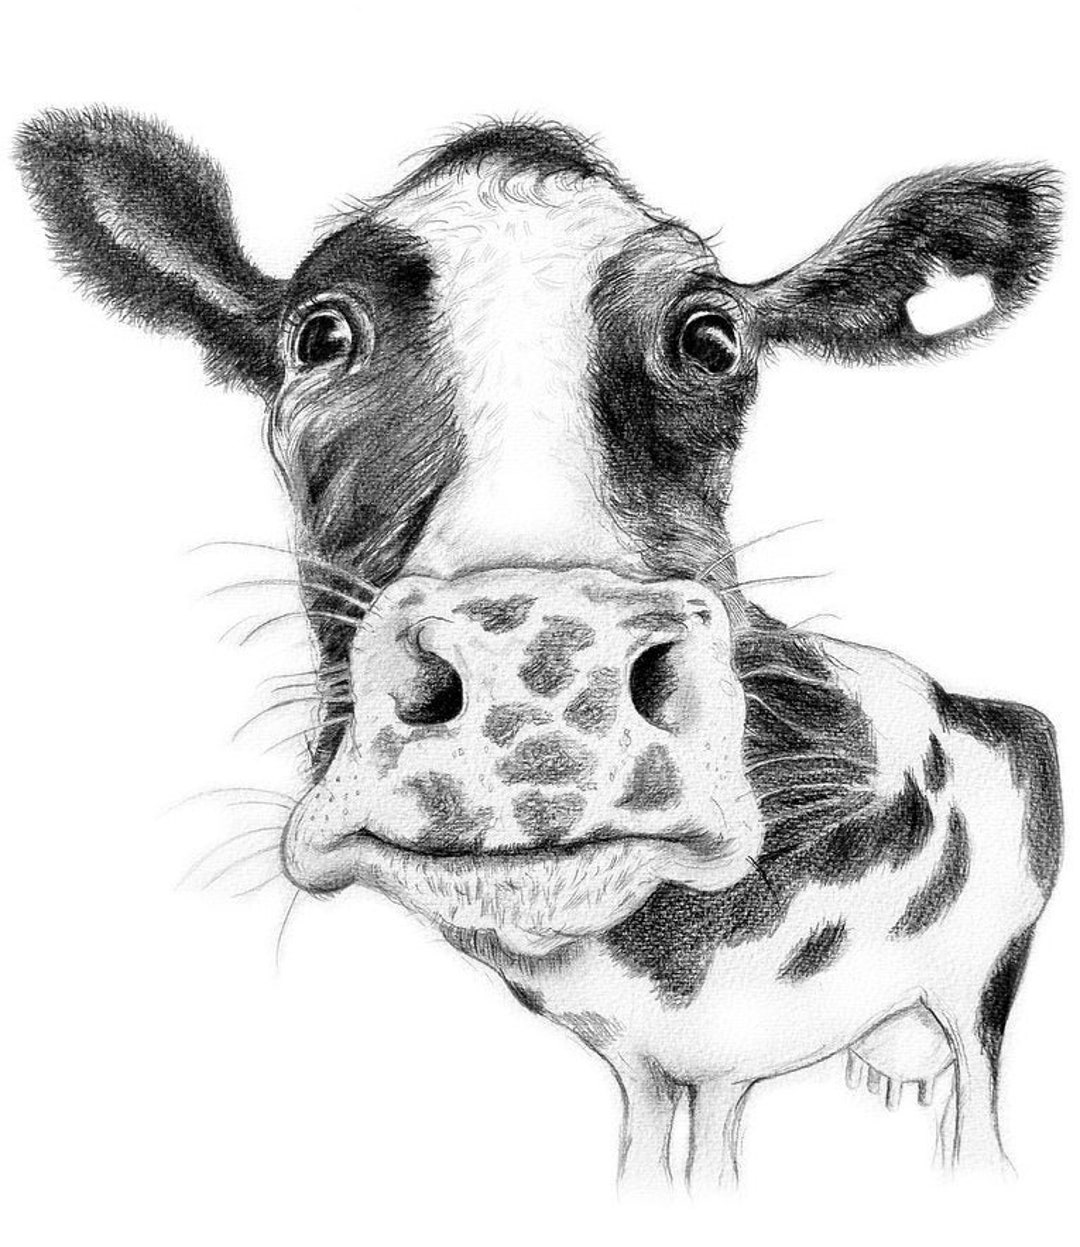 Buy Limited Edition PRINT Cow Black and White Pencil Drawing ...